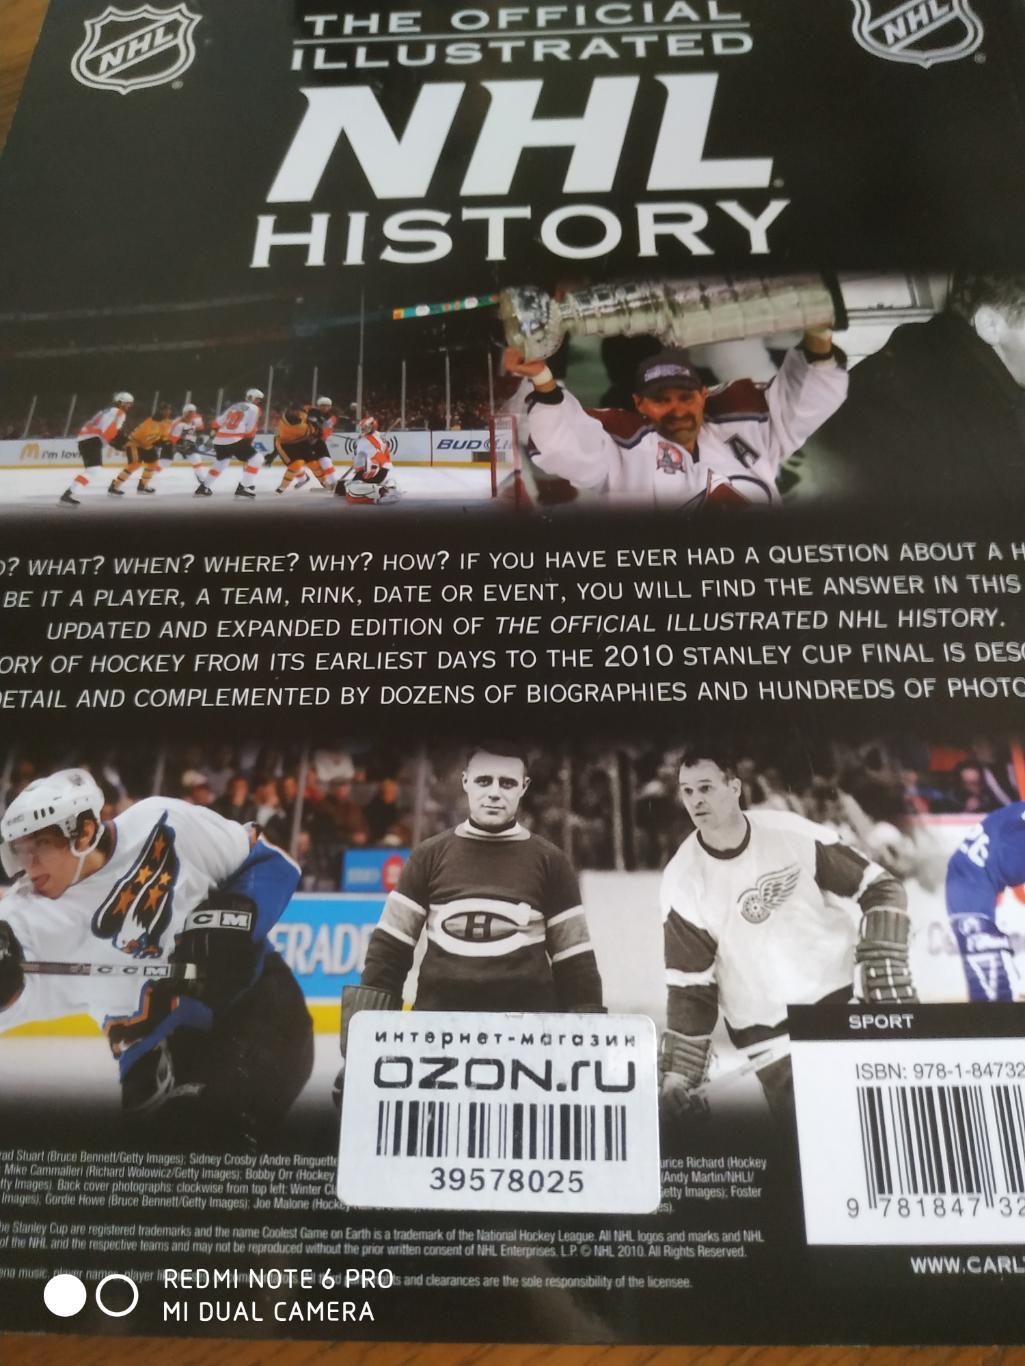 THE OFFICIAL ILLUSTRATED NHL HISTORY 3